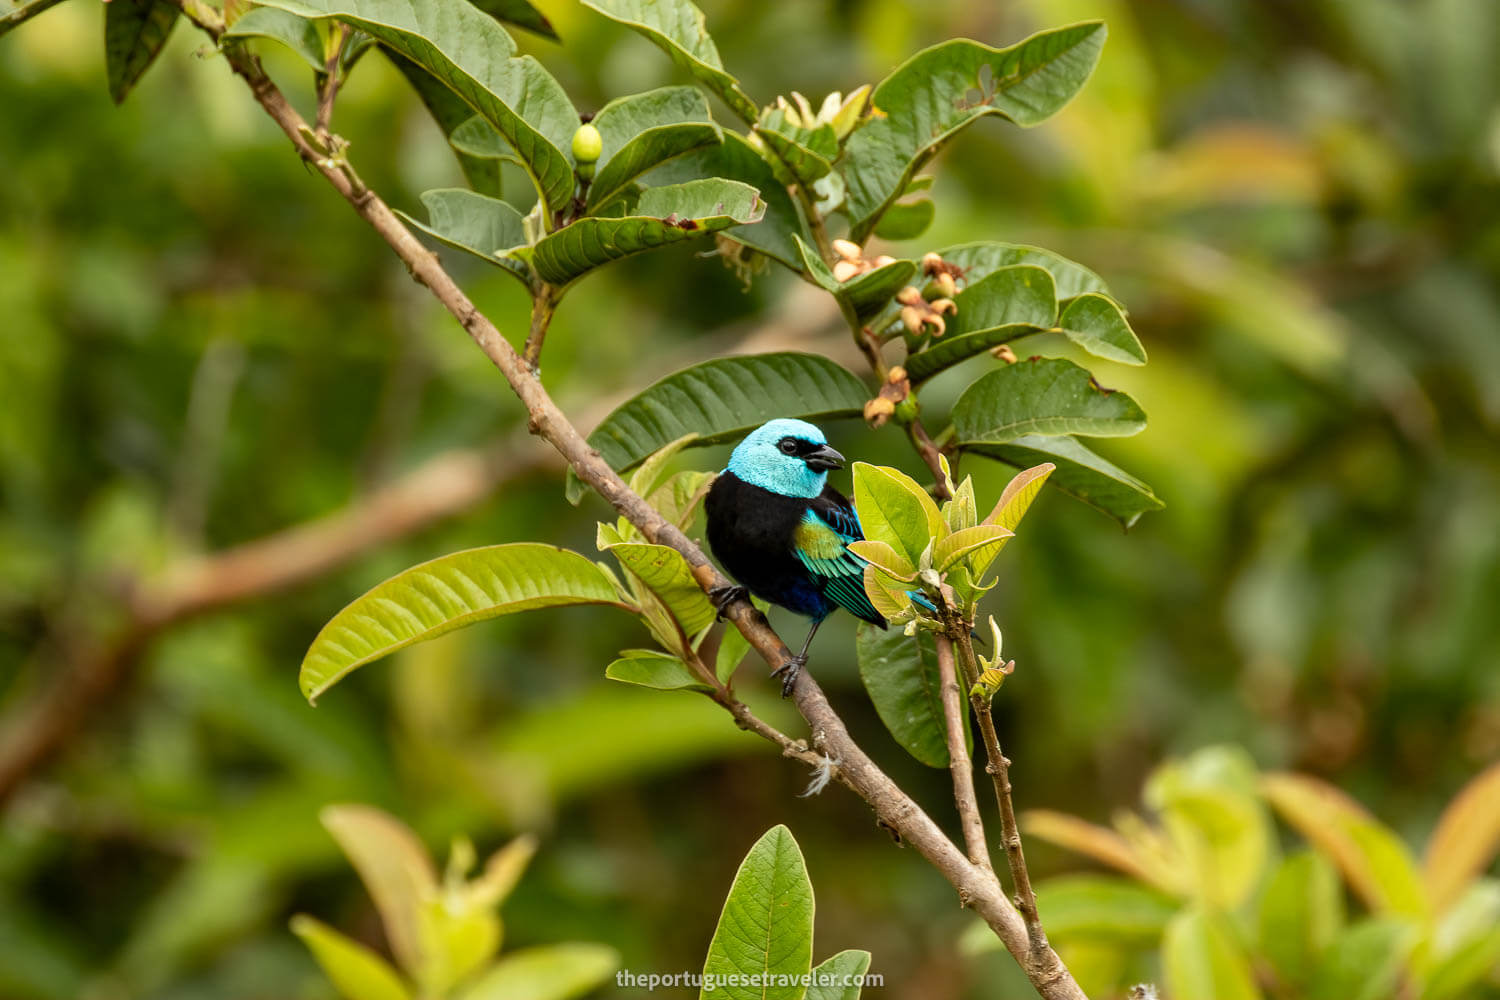 A Blue Necked Tanager on the Birdwatching Tour in Mindo